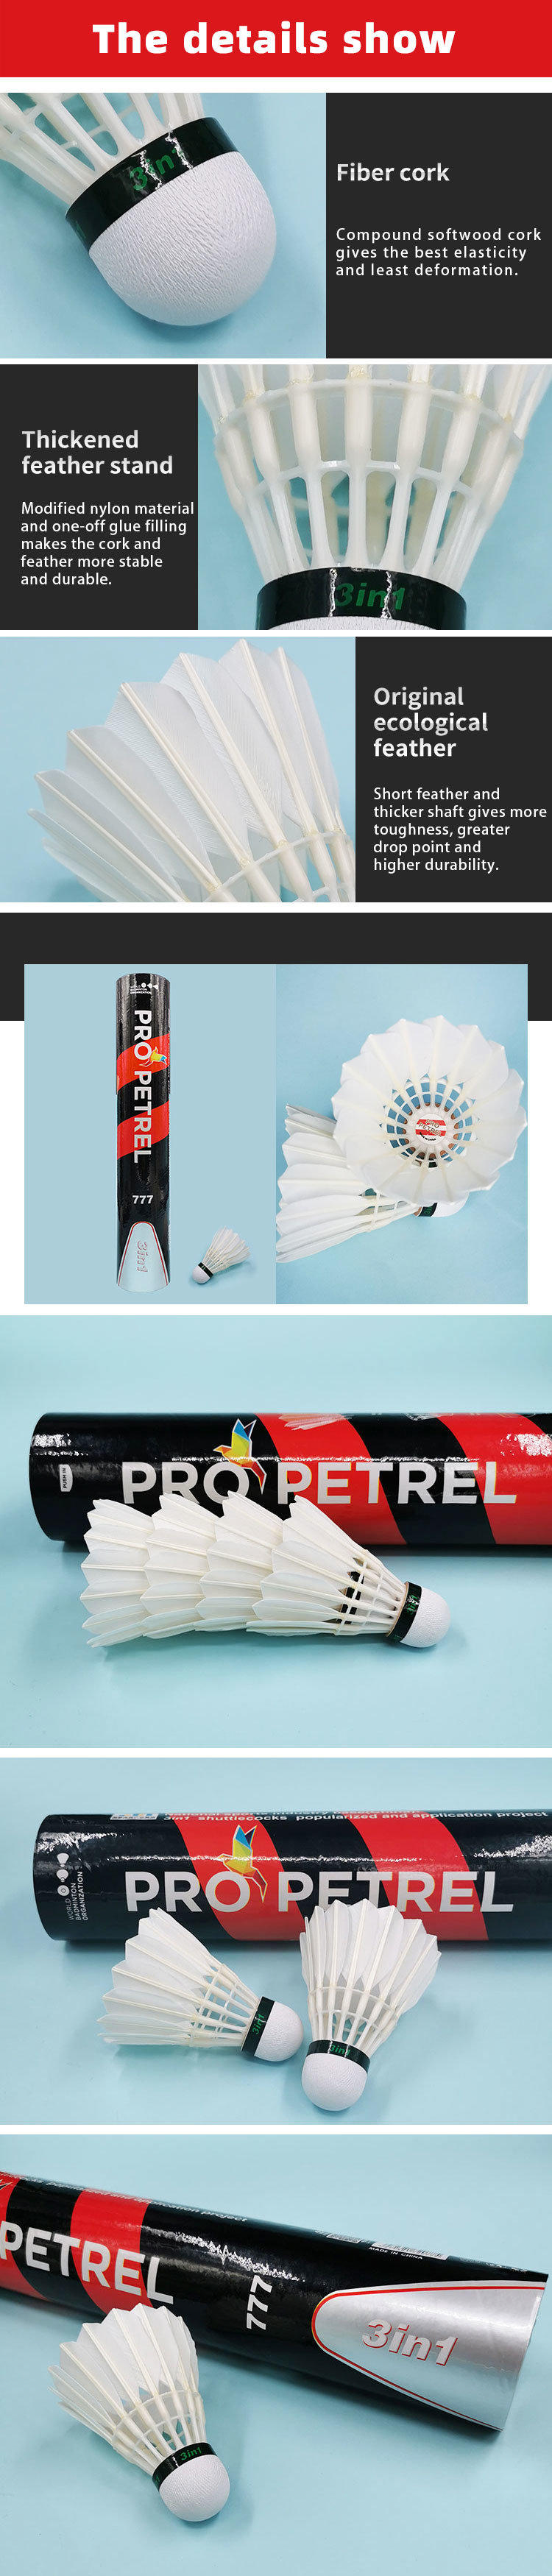 Propetrel 777 Duck Feather Shuttlecock High Quality for Training Practicing